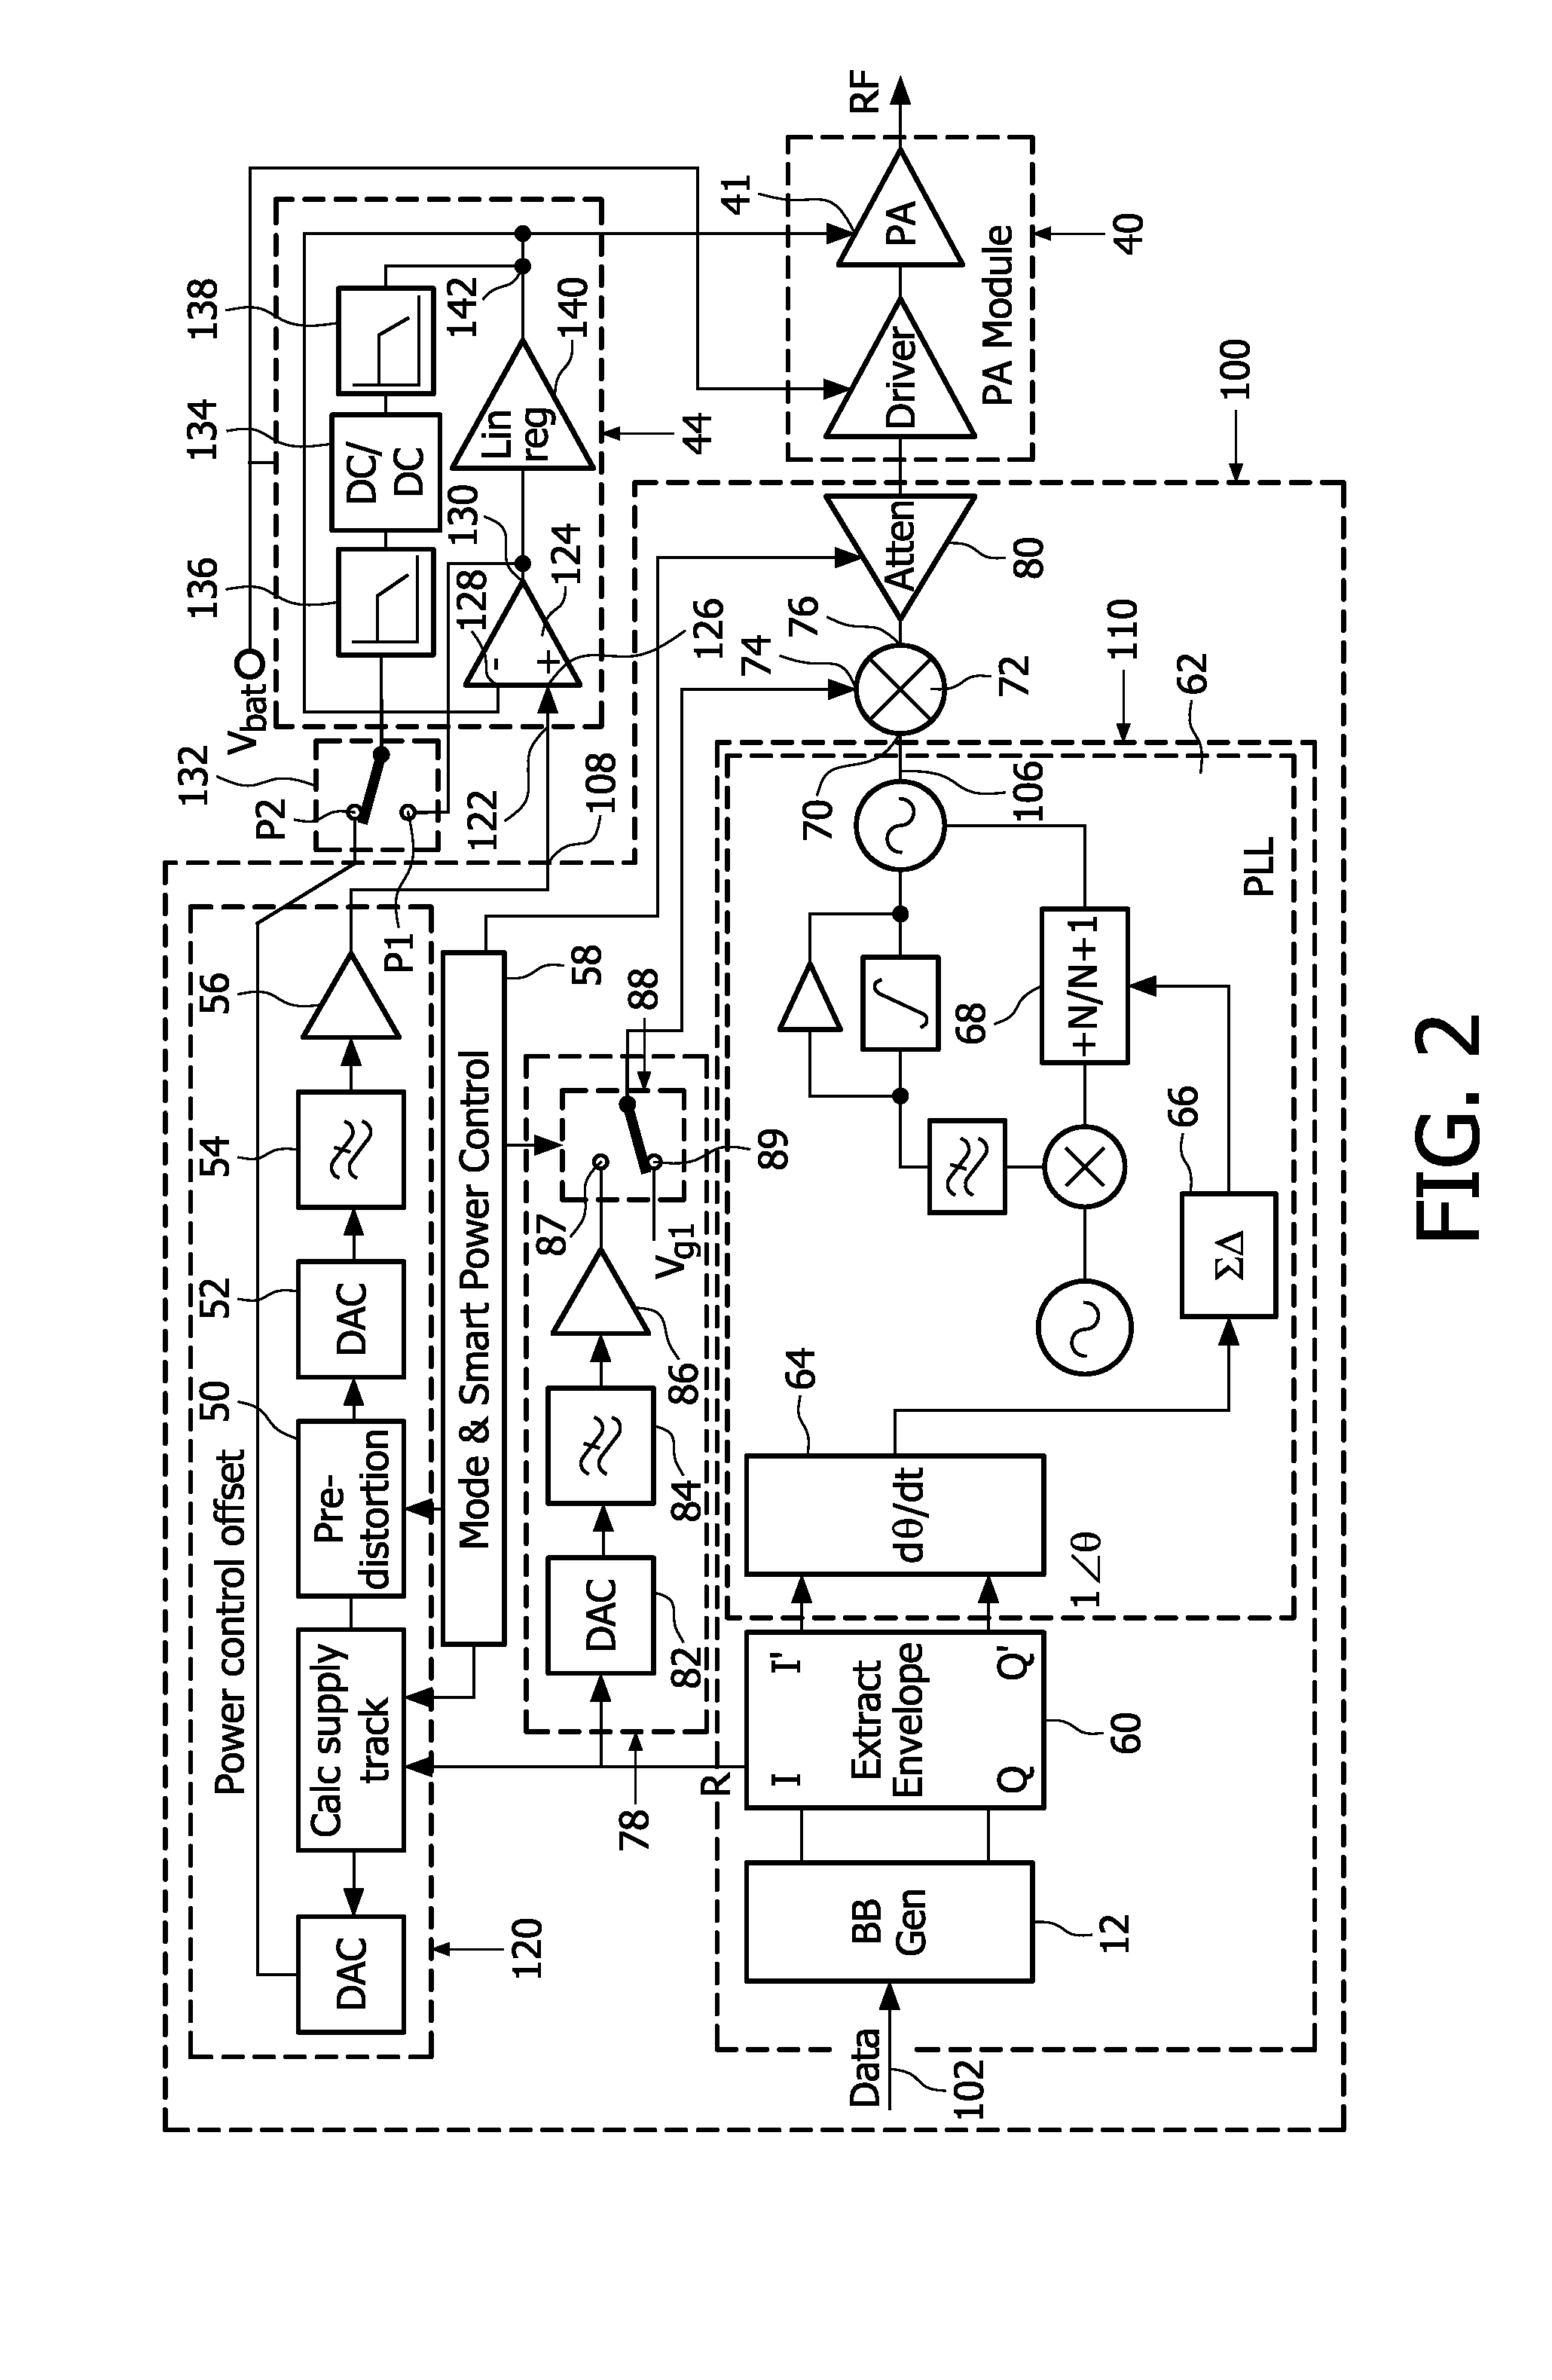 Multi-mode radio transmitters and a method of their operation